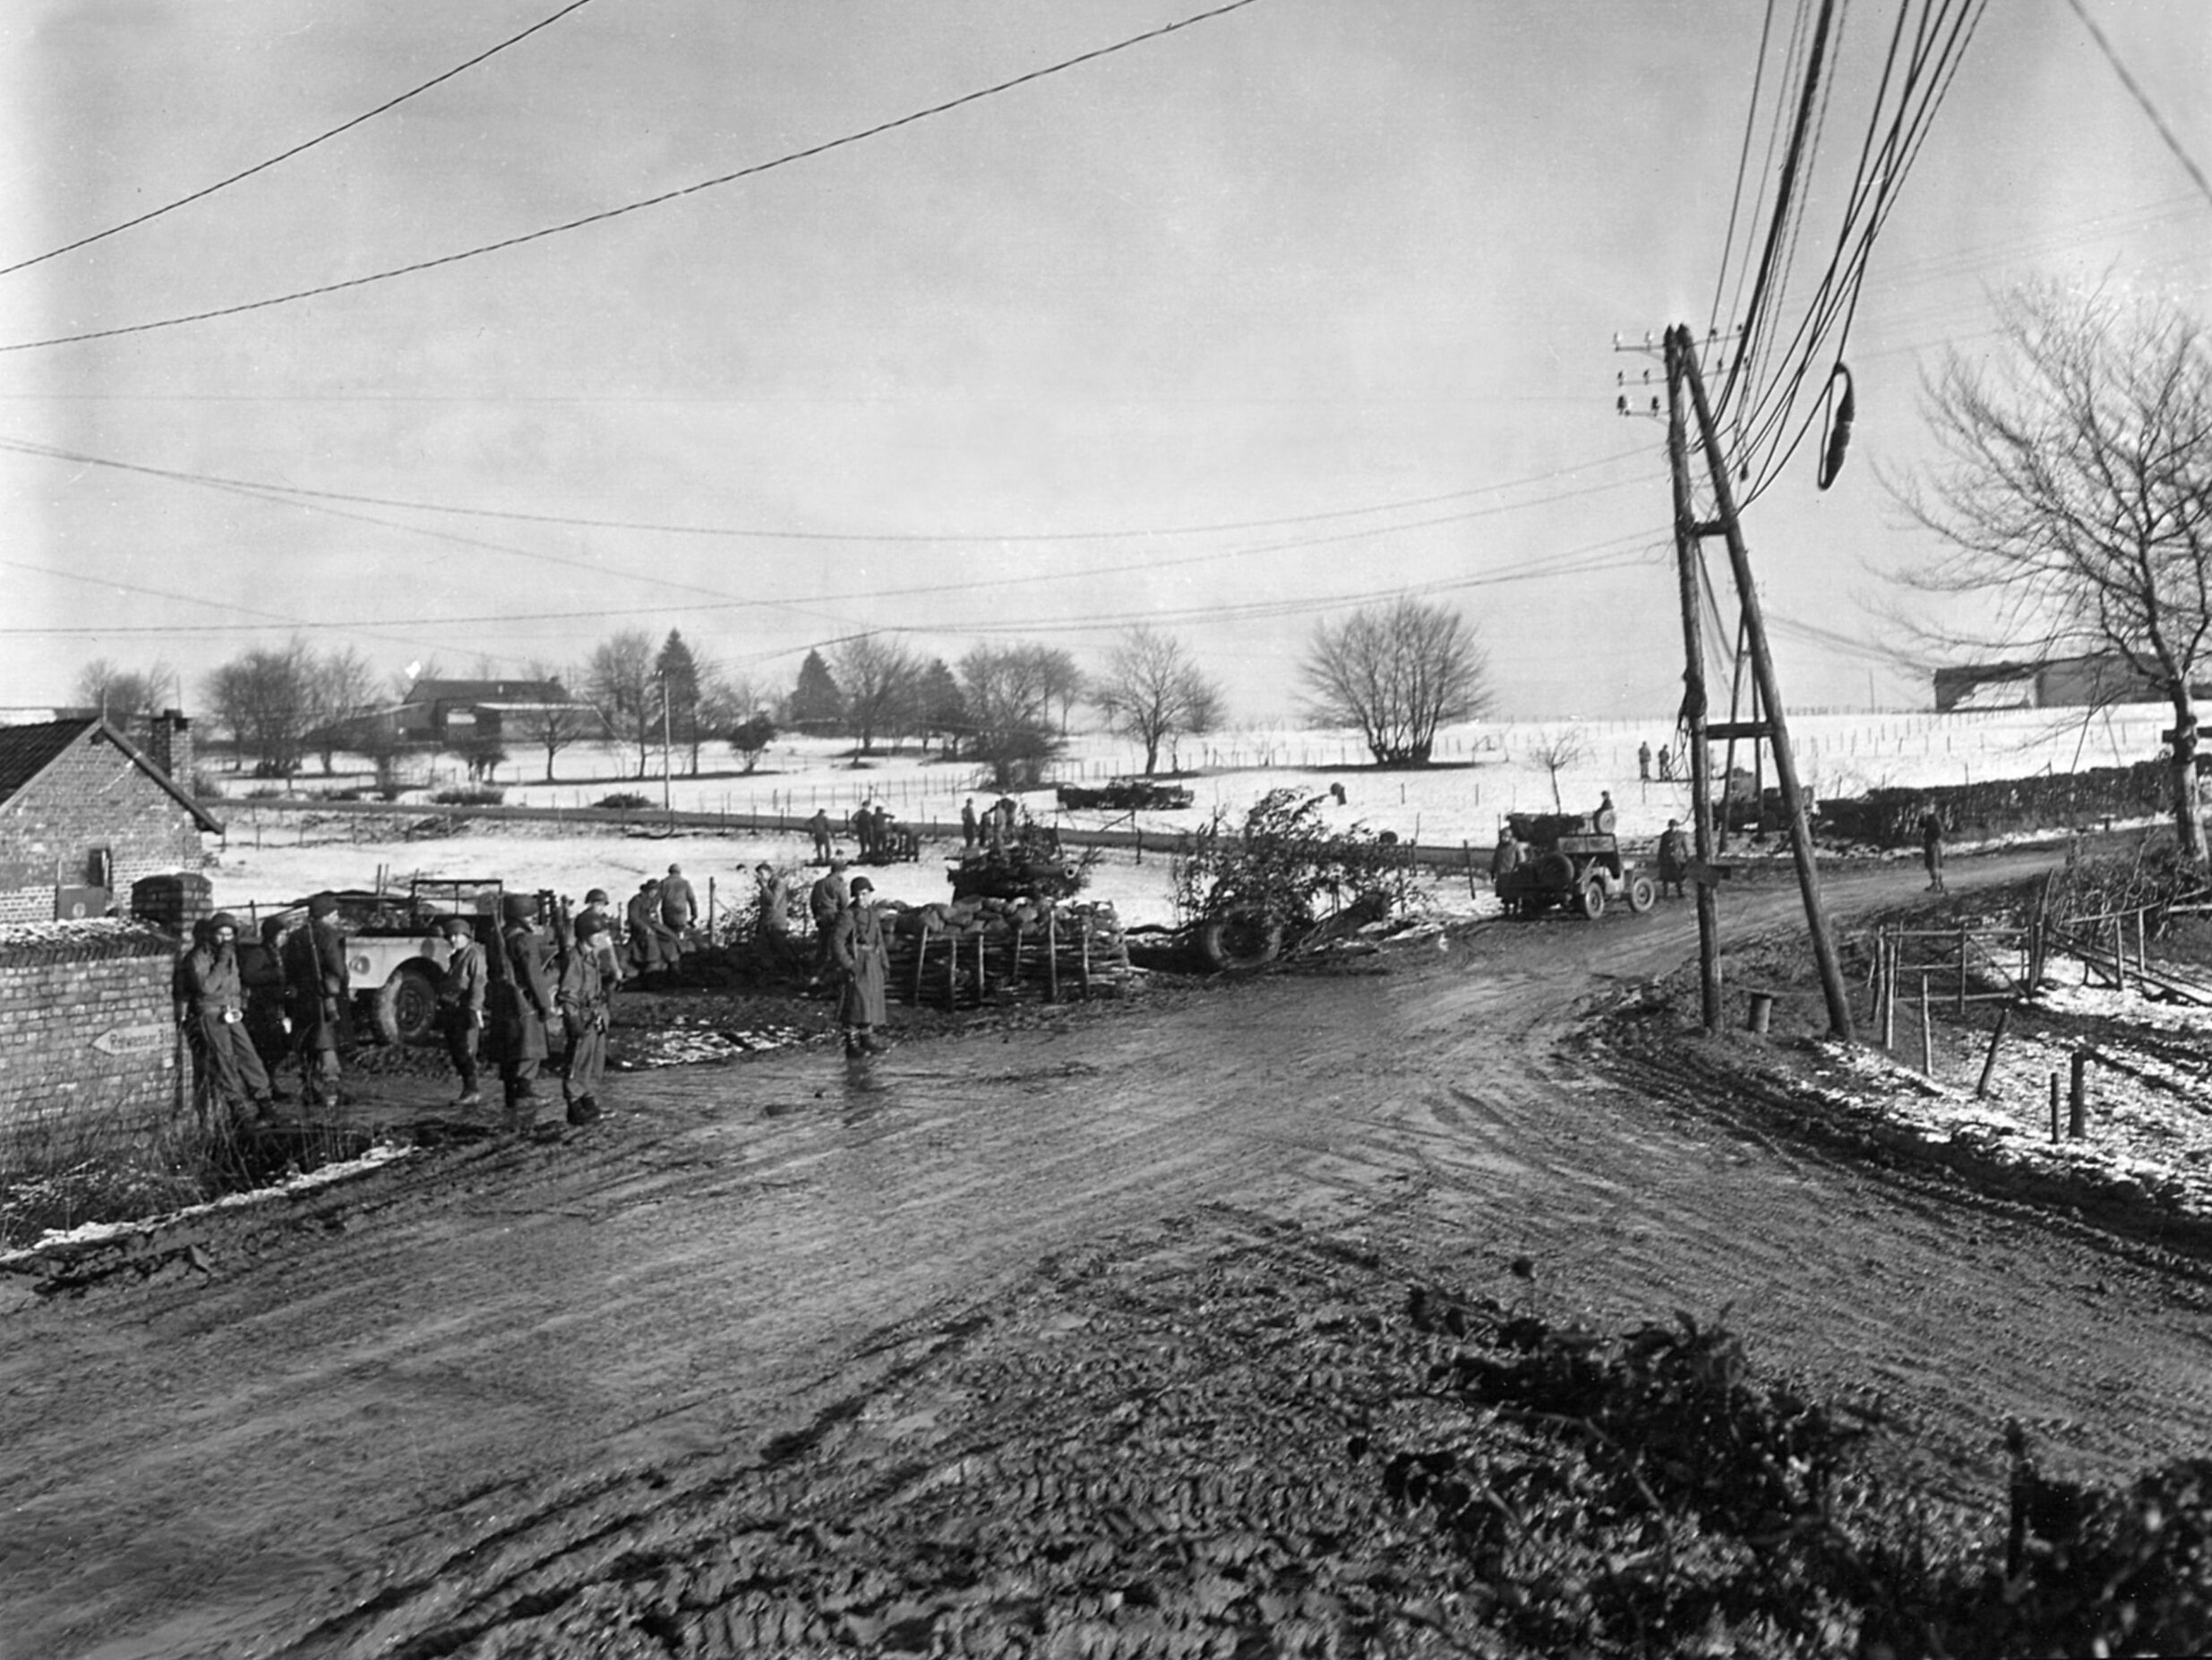 Standing watch at a crossroads near Malmédy, U.S. troops wait for the inevitable clash with the Germans.